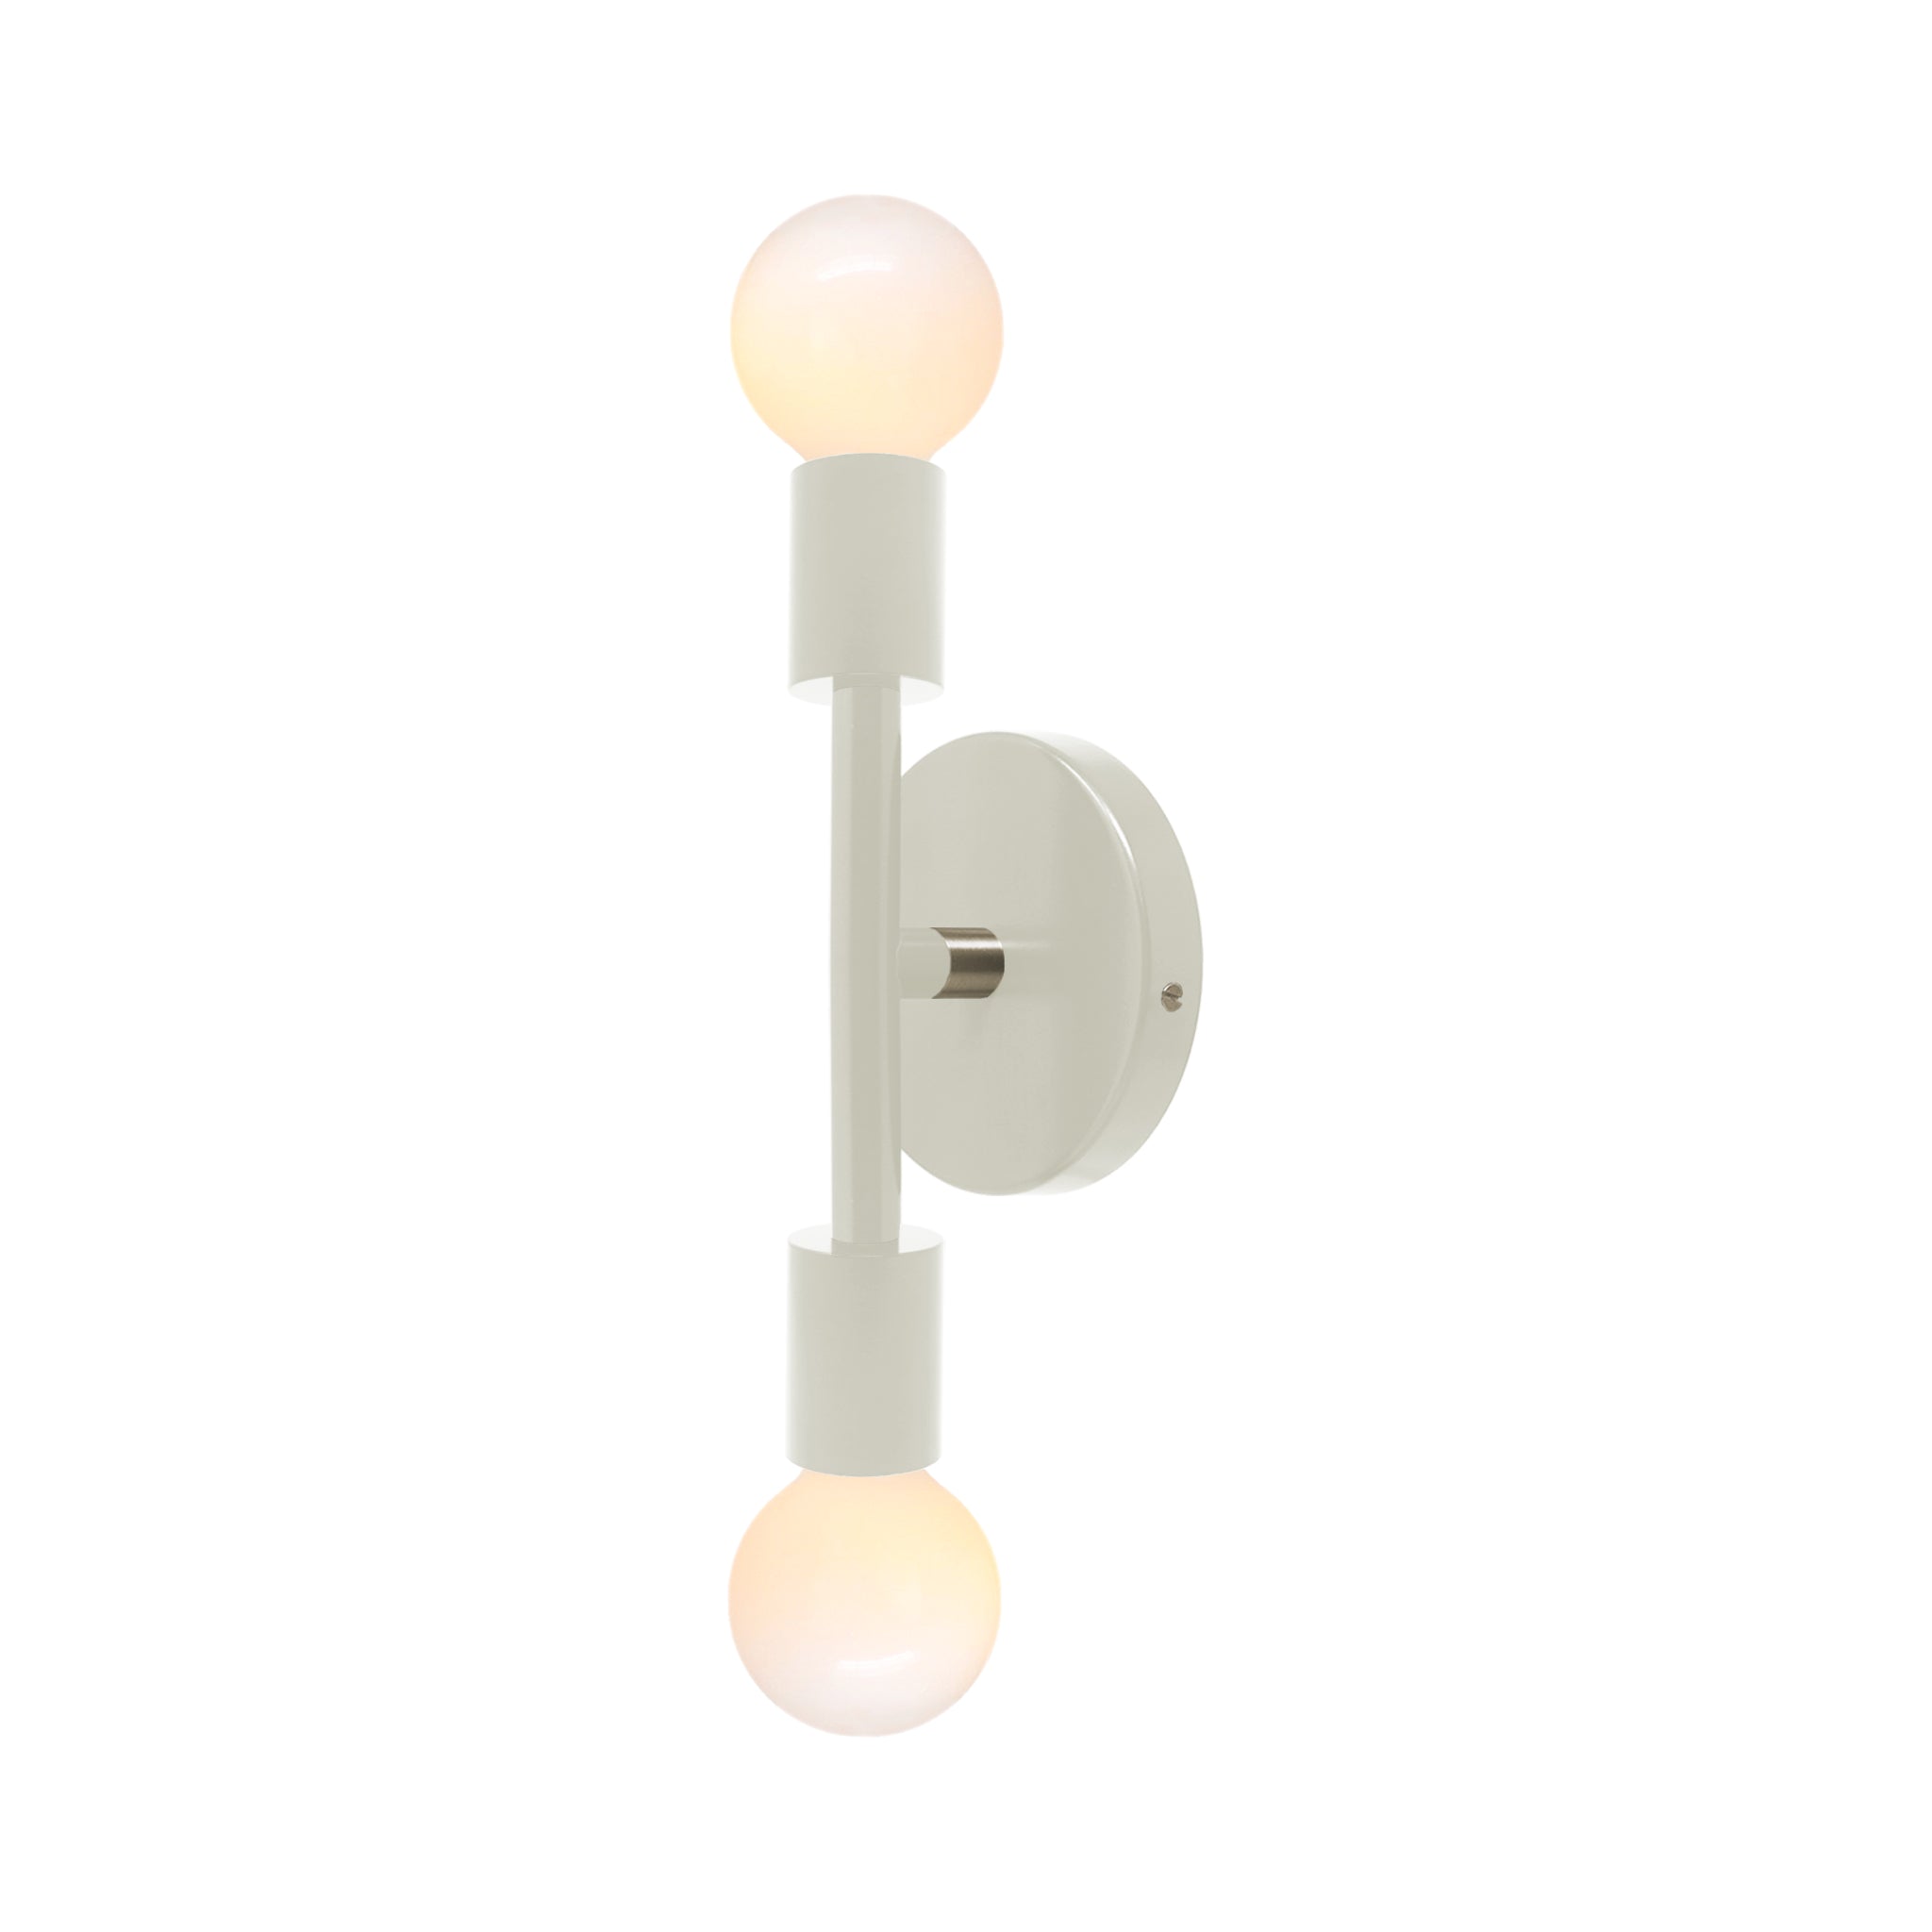 Nickel and bone color Pilot sconce 11" Dutton Brown lighting